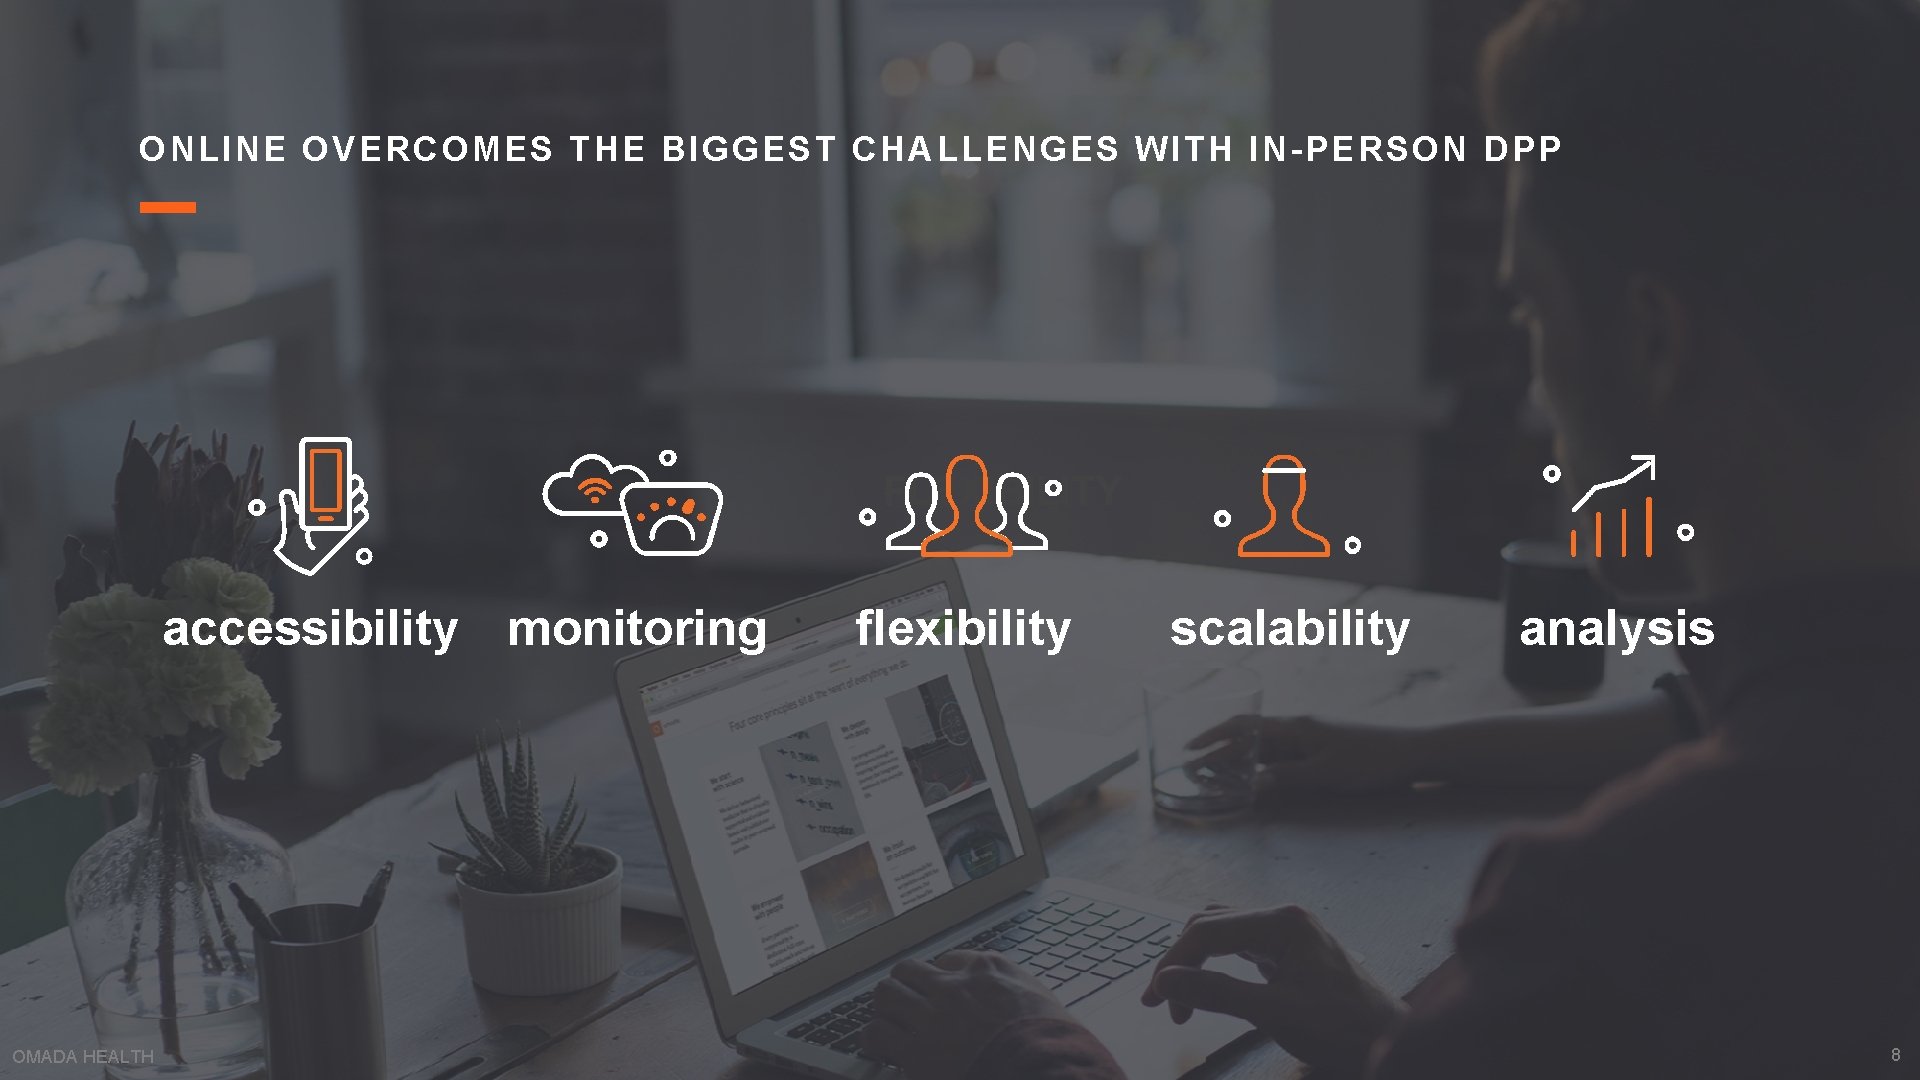 ONLINE OVERCOMES THE BIGGEST CHALLENGES WITH IN-PERSON DPP FLEXIBILITY accessibility monitoring OMADA HEALTH flexibility